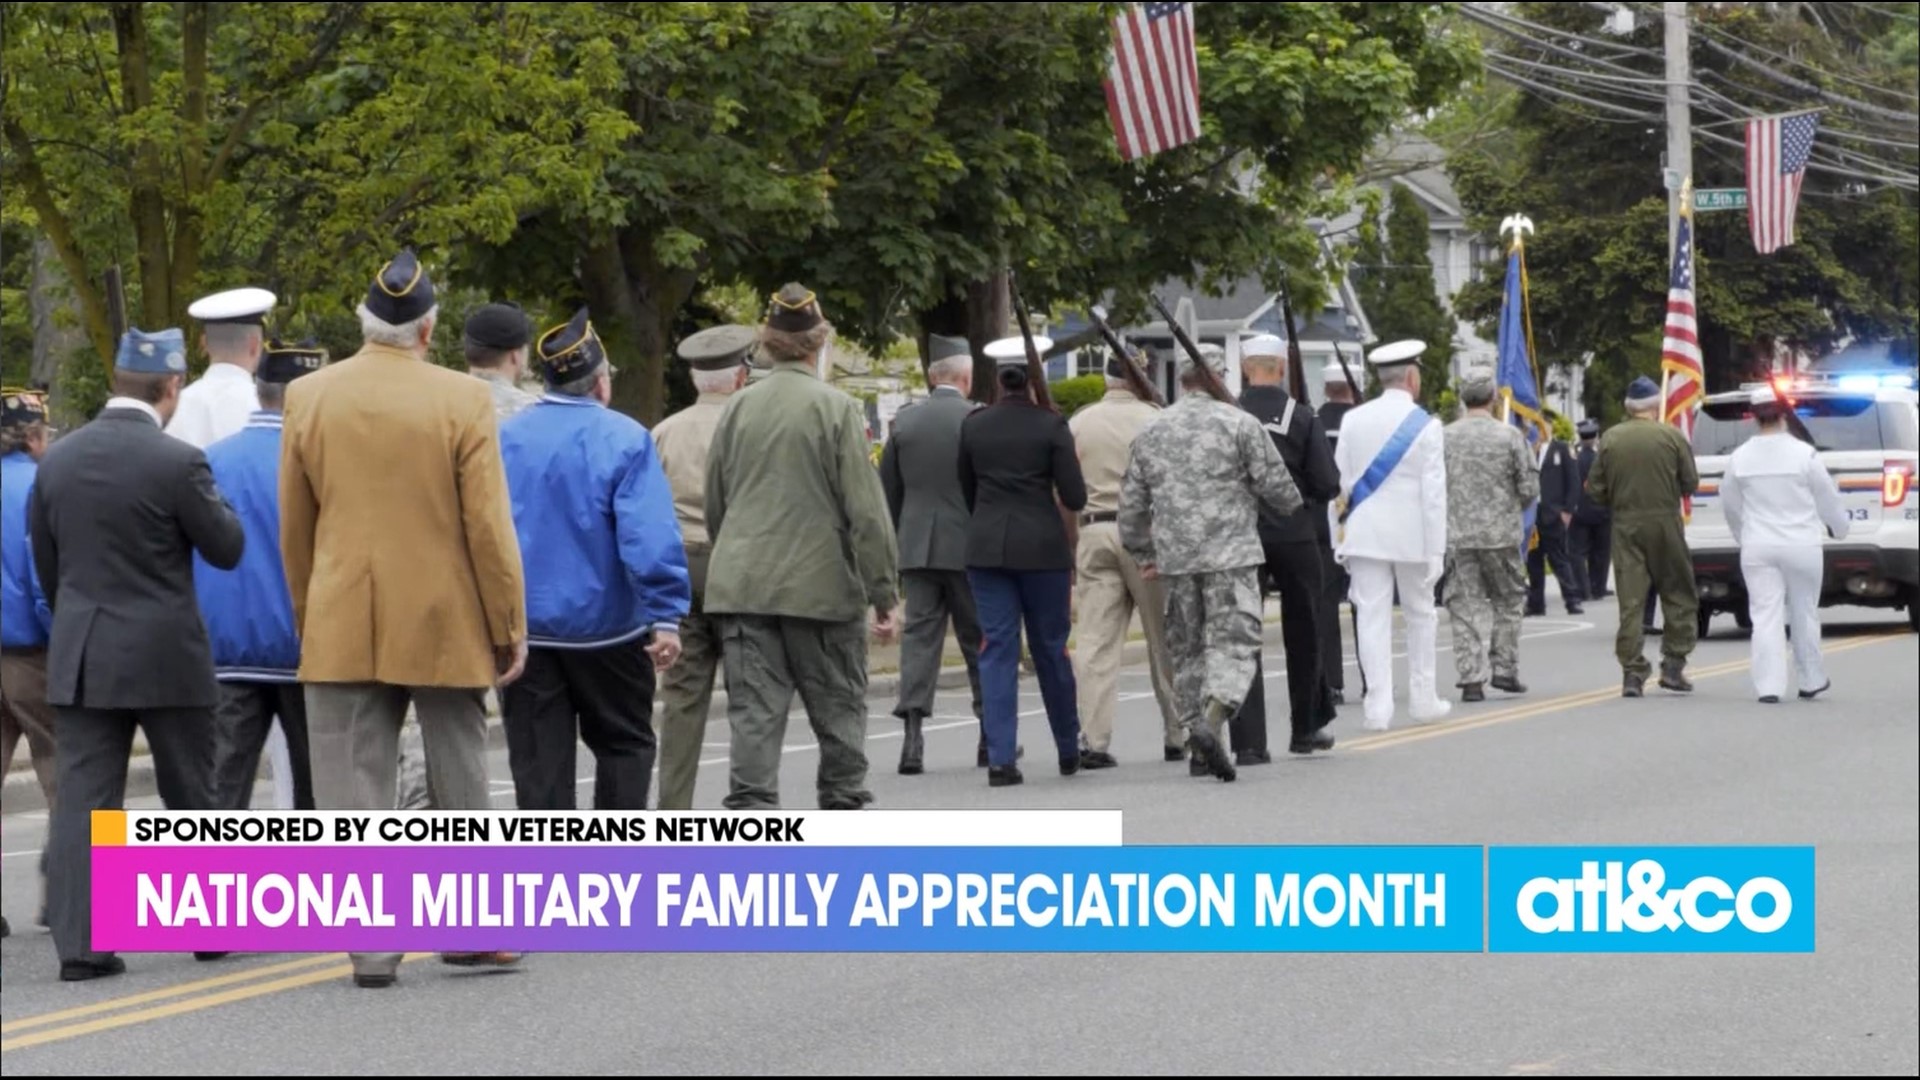 Show your support for military families with Cohen Veterans Network.